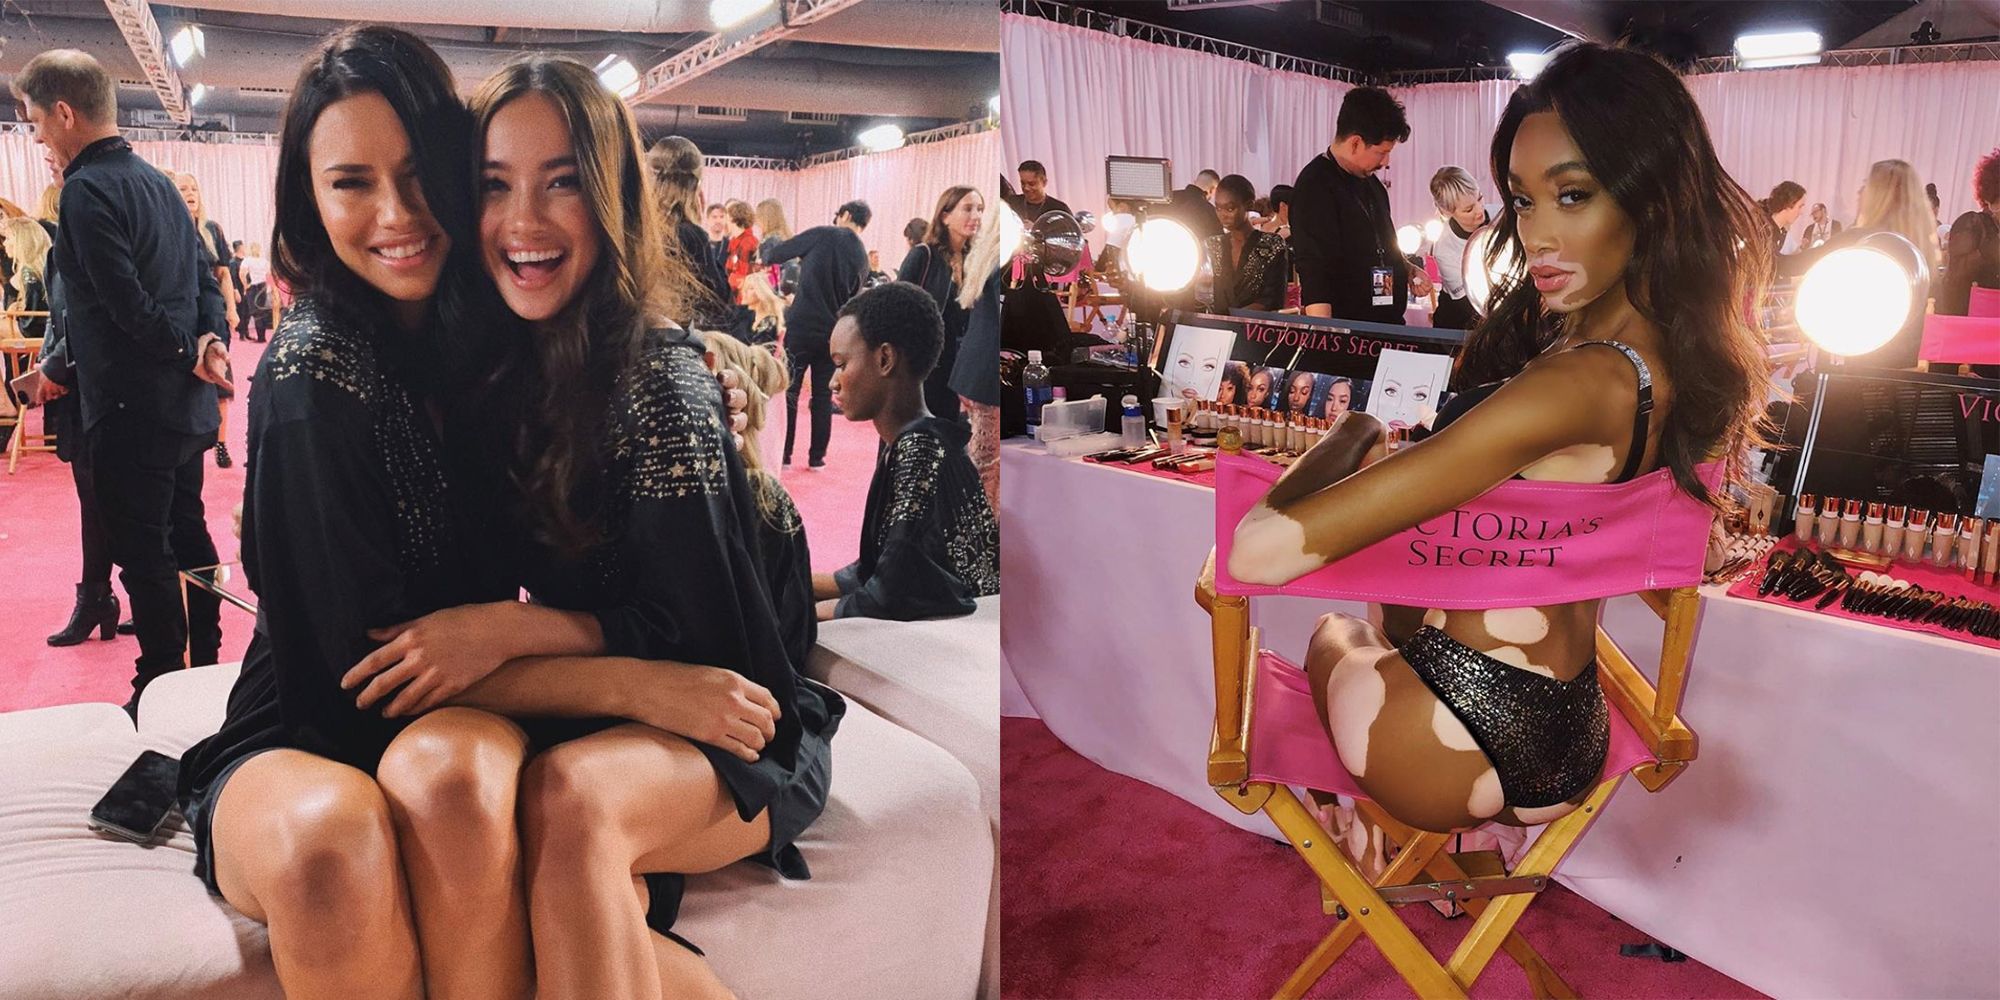 The Victoria's Secret 2019 fashion show has been canceled - Vox